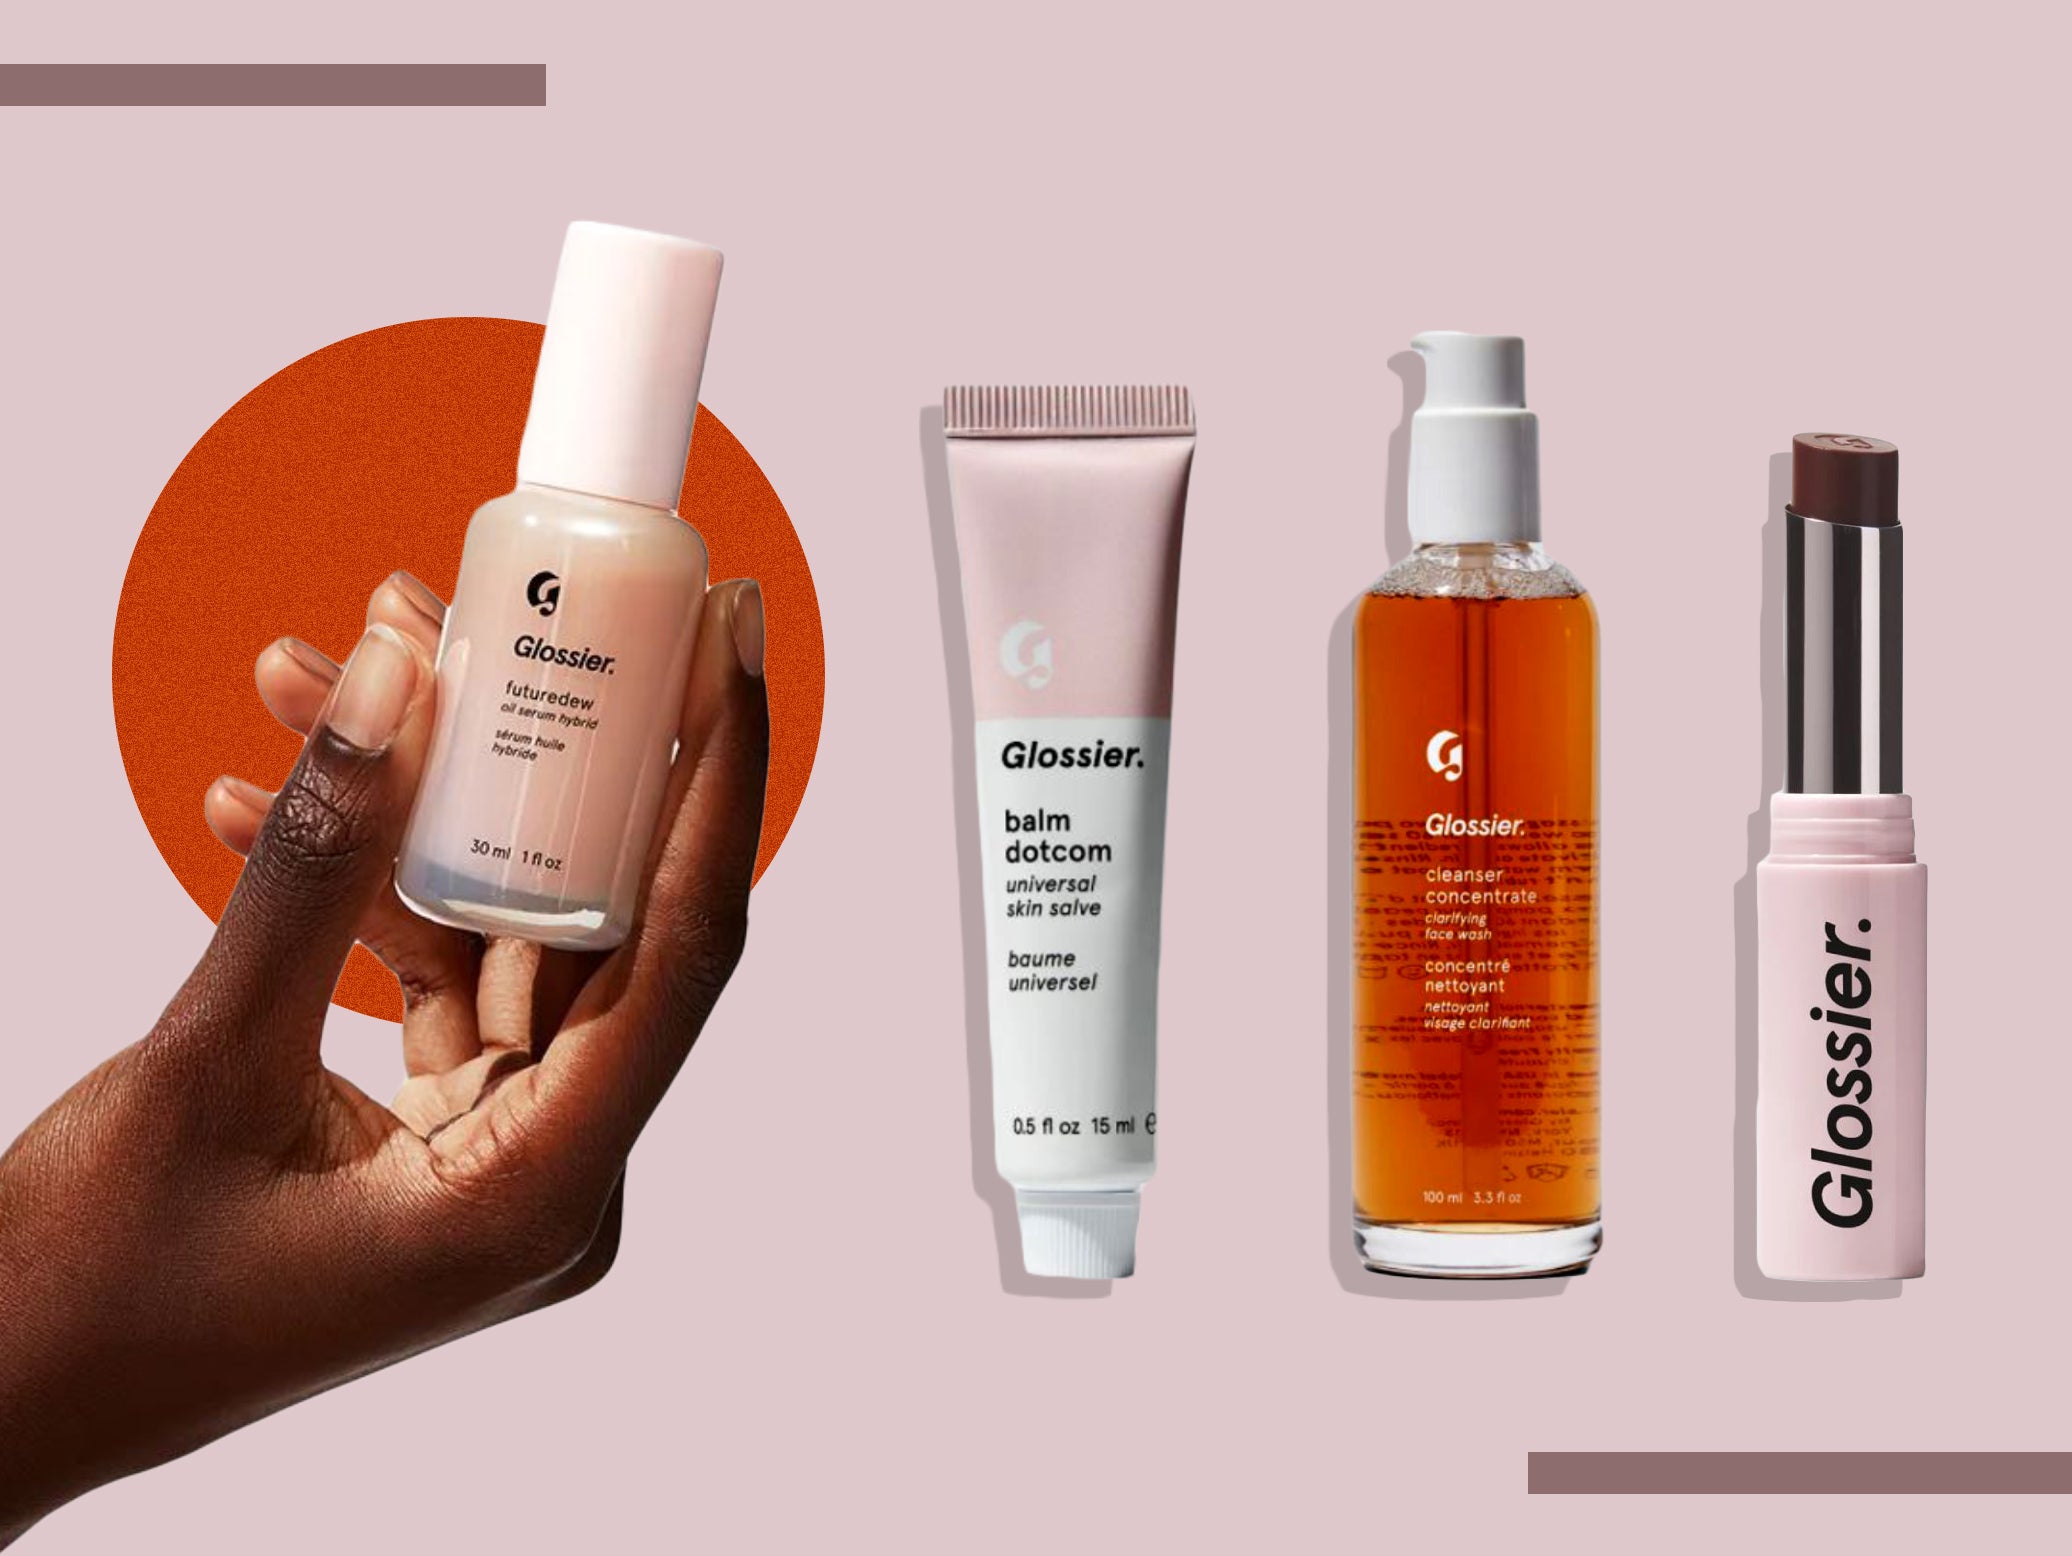 Glossier favourites are in high demand this Black Friday